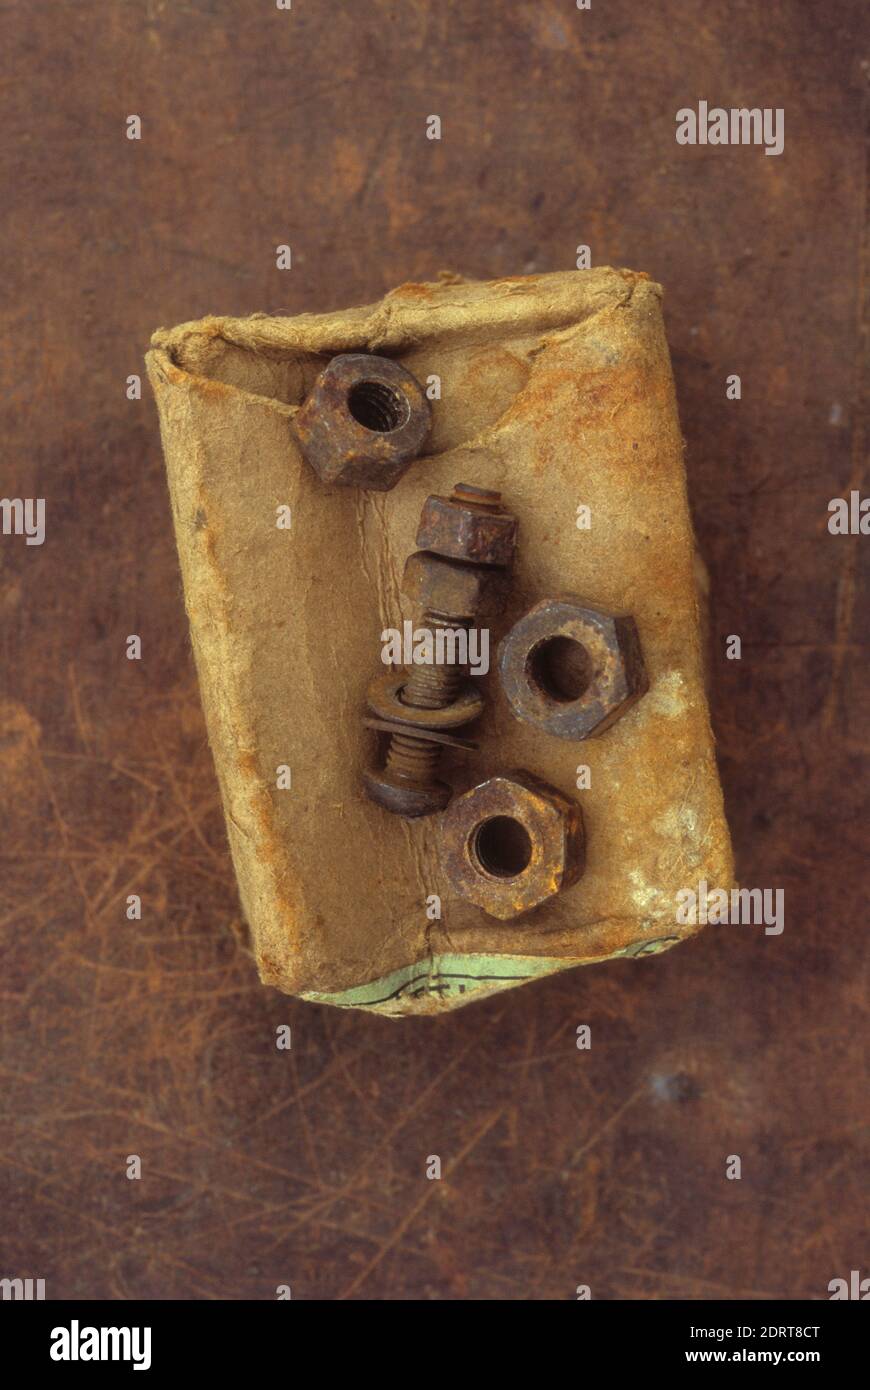 Old crumpled rust-stained cardboard box with three rusty metal nuts and used screw lying on top Stock Photo